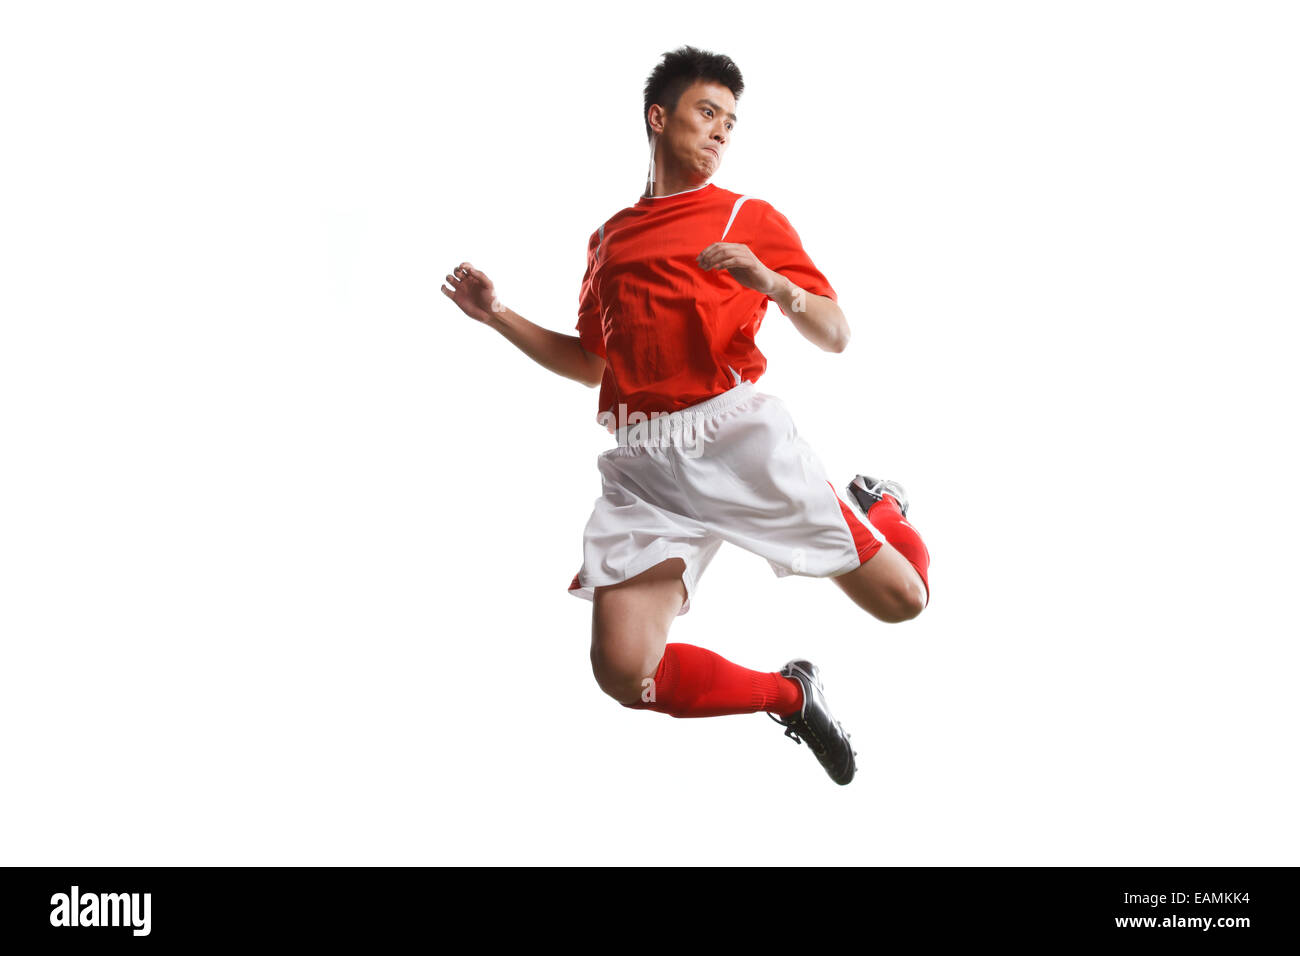 Football players jumping to play in midair Stock Photo